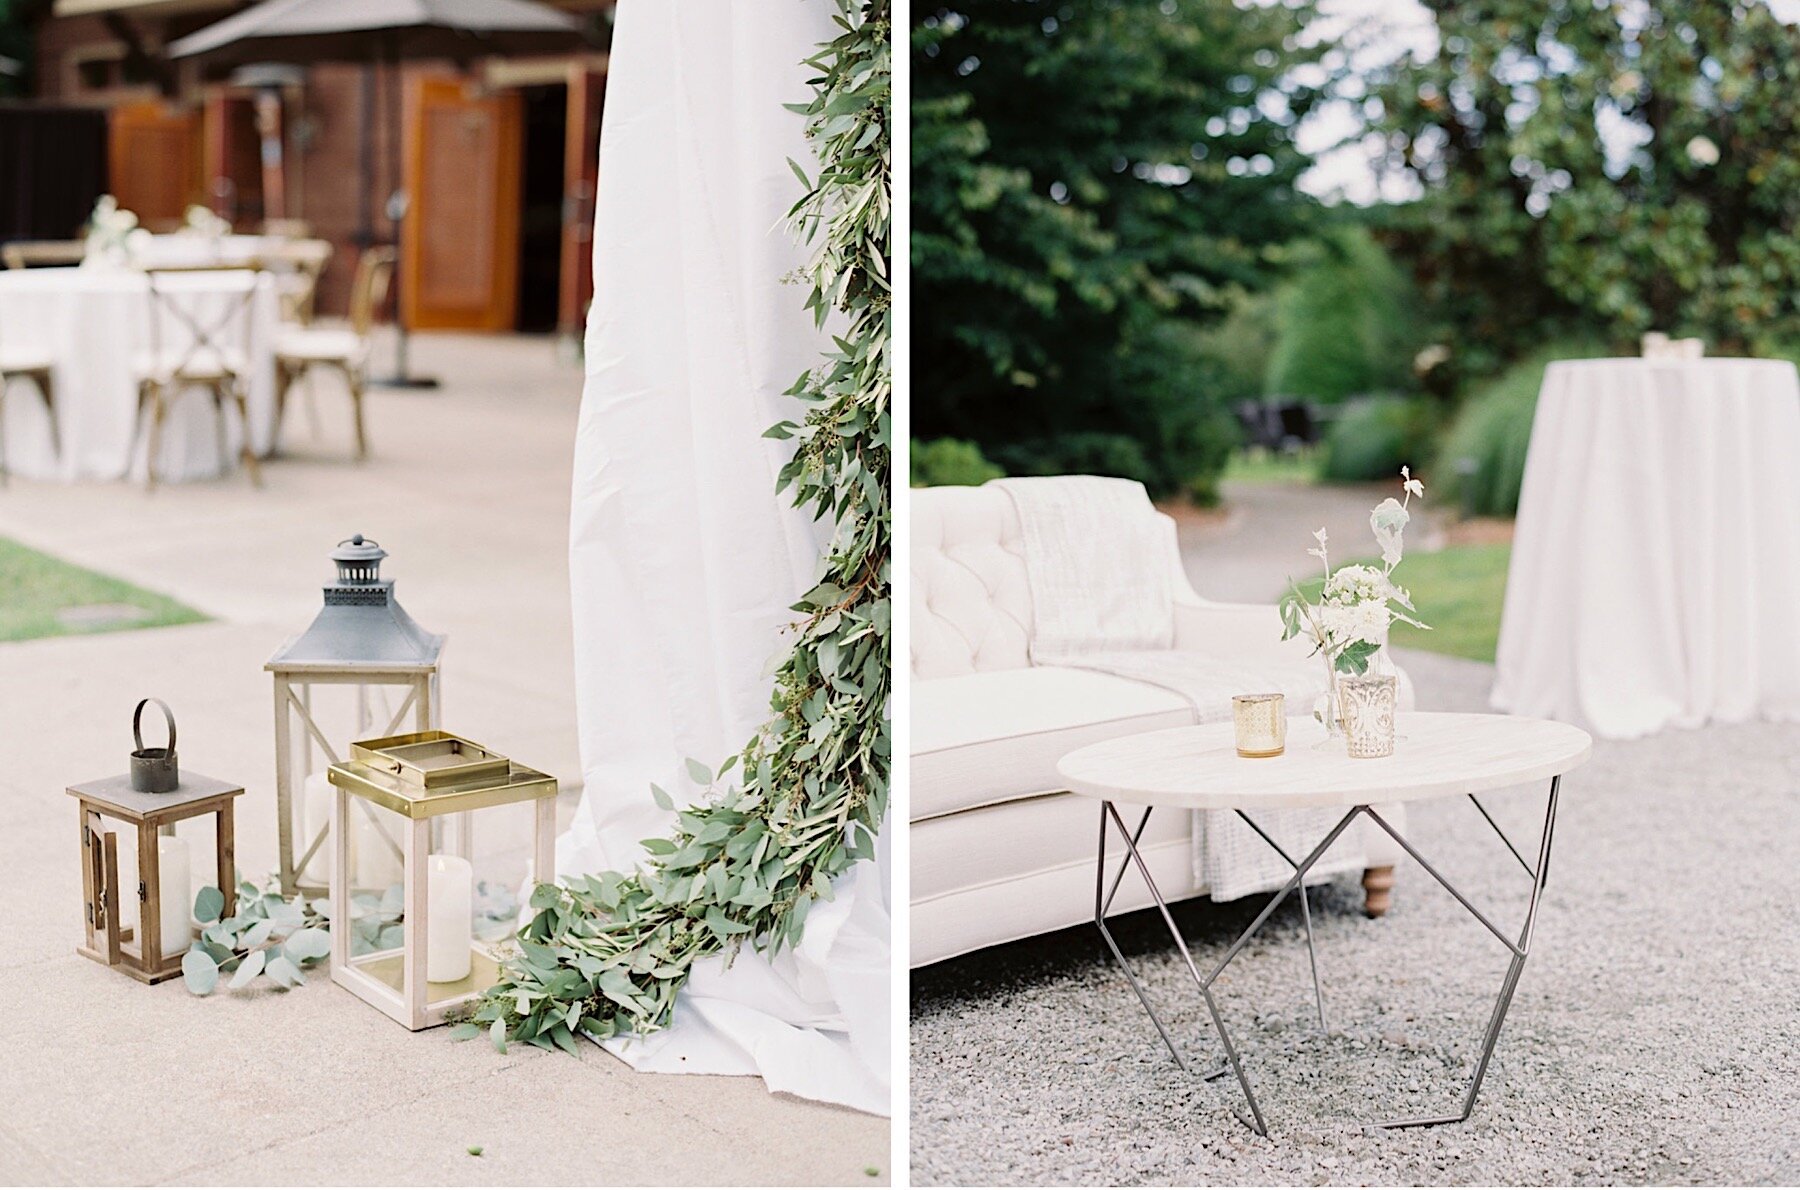 20_top_White_Lodge_luxury_green_Company_by_at_Design_and_Seattle_florist_Gather_wedding_Willows.jpg